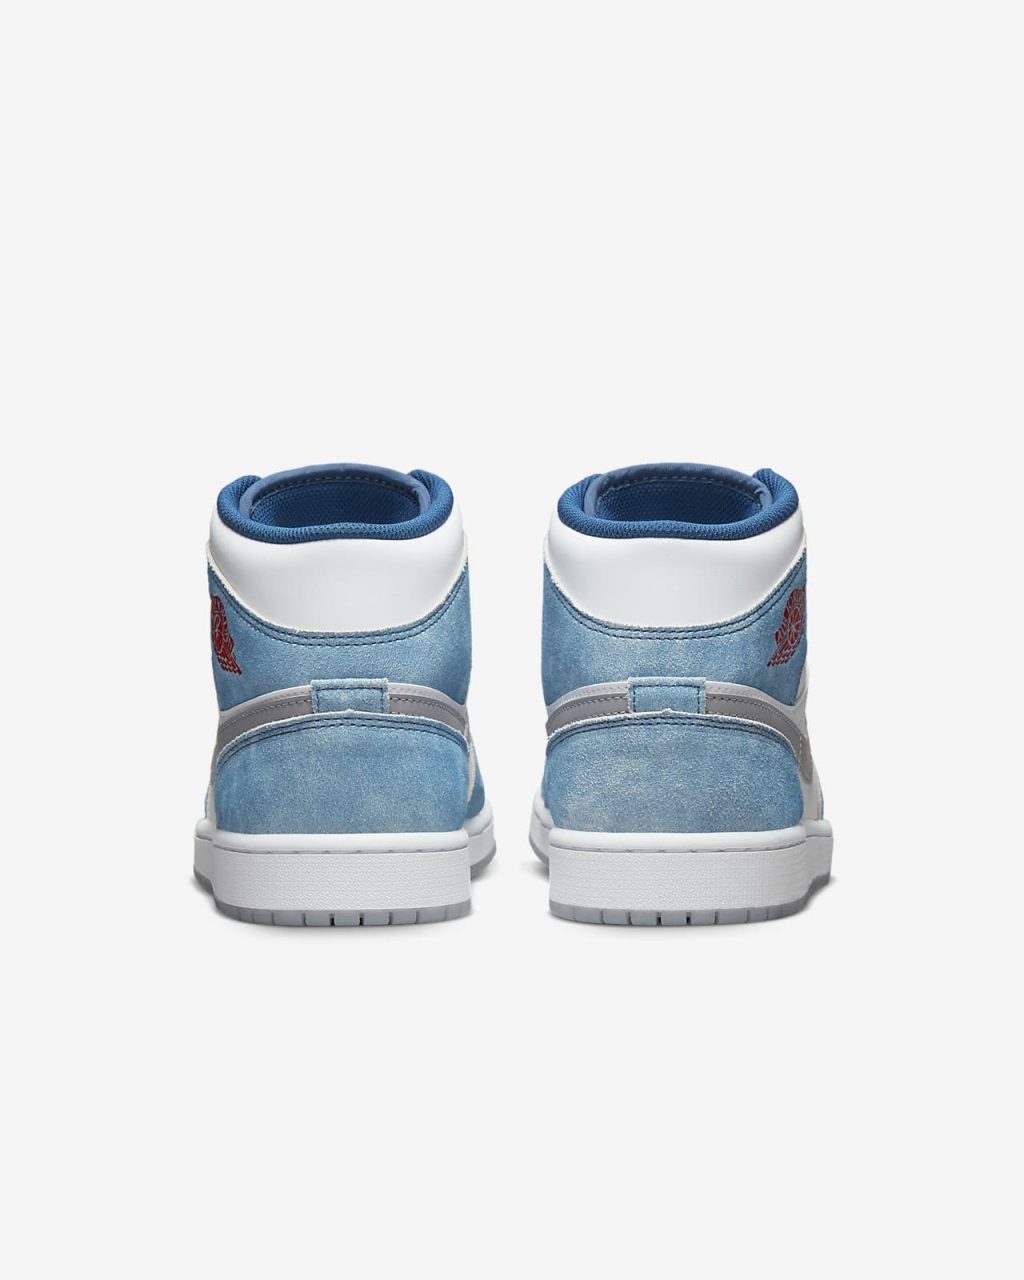 nike-air-jordan-1-mid-french-blue-dr6235-401-release-20220818